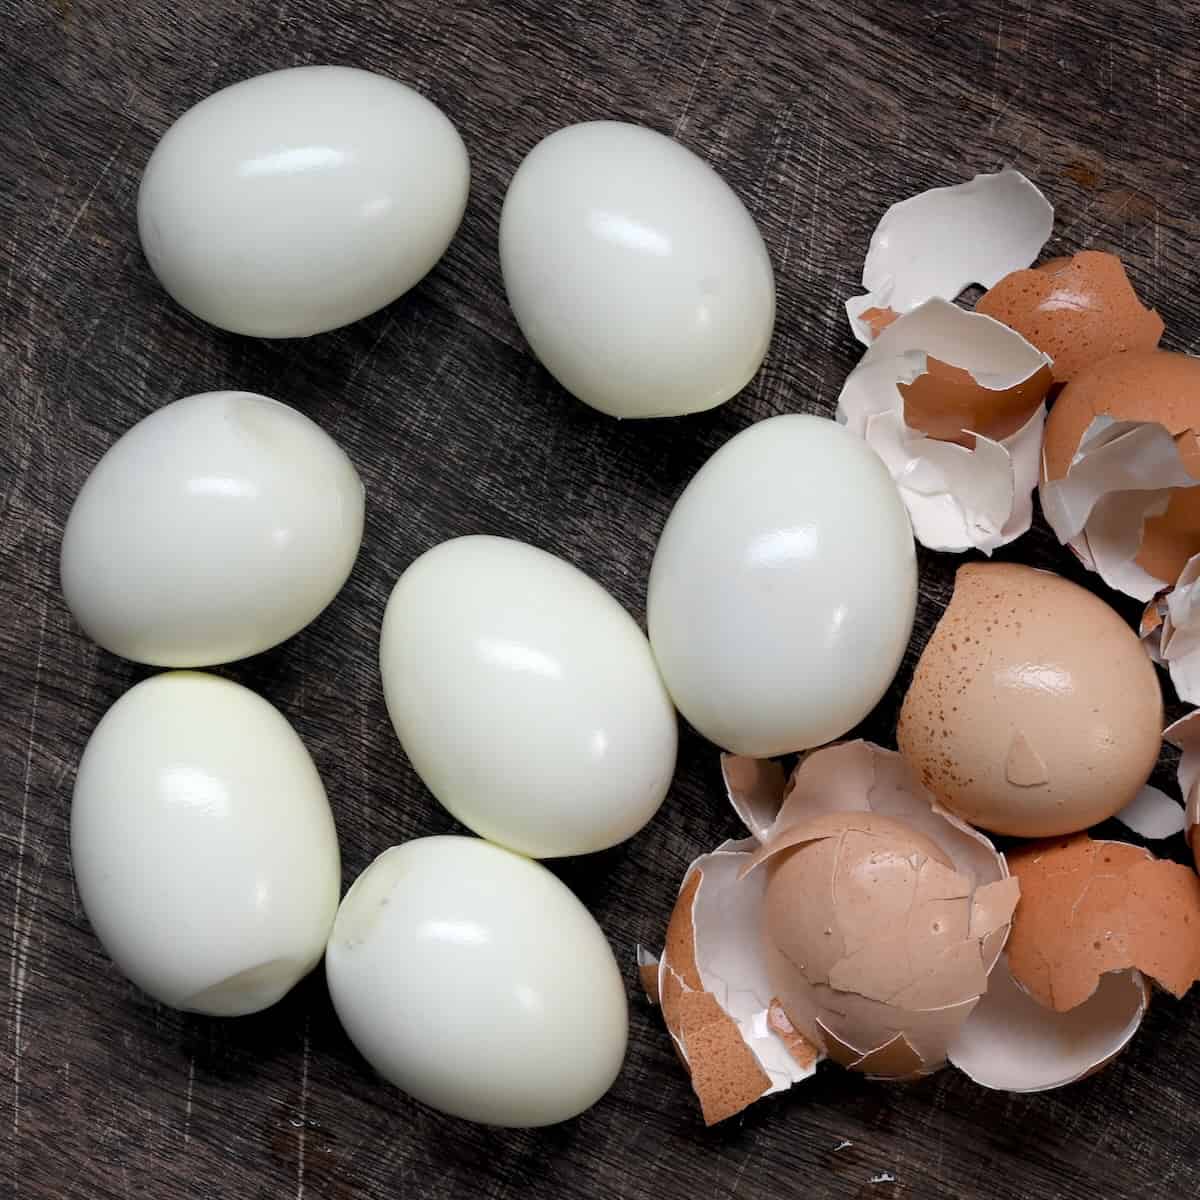 https://www.alphafoodie.com/wp-content/uploads/2023/08/Boiled-Eggs-Boiled-eggs-square-new.jpeg